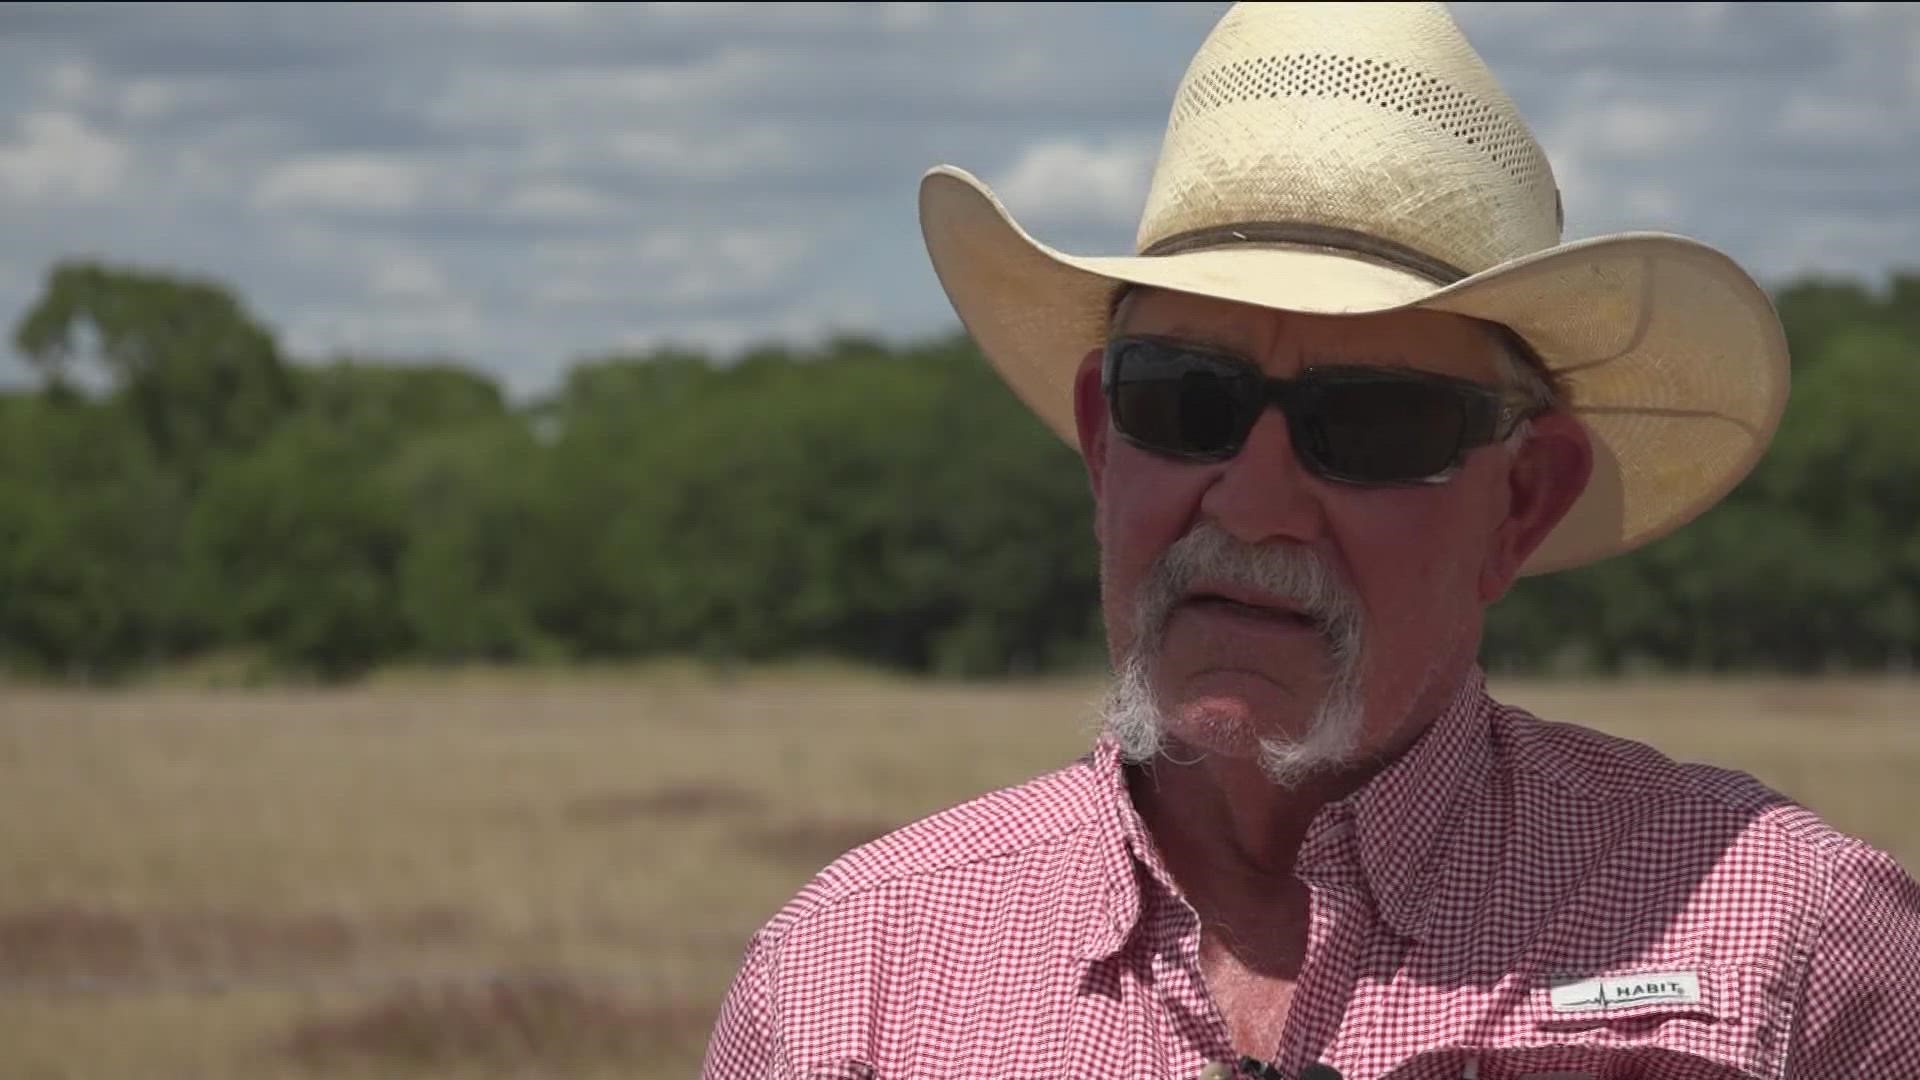 Seemingly every season brings extreme weather to Fayette County. One local rancher said he's made long-term plans to ease the difficult, dry summer.